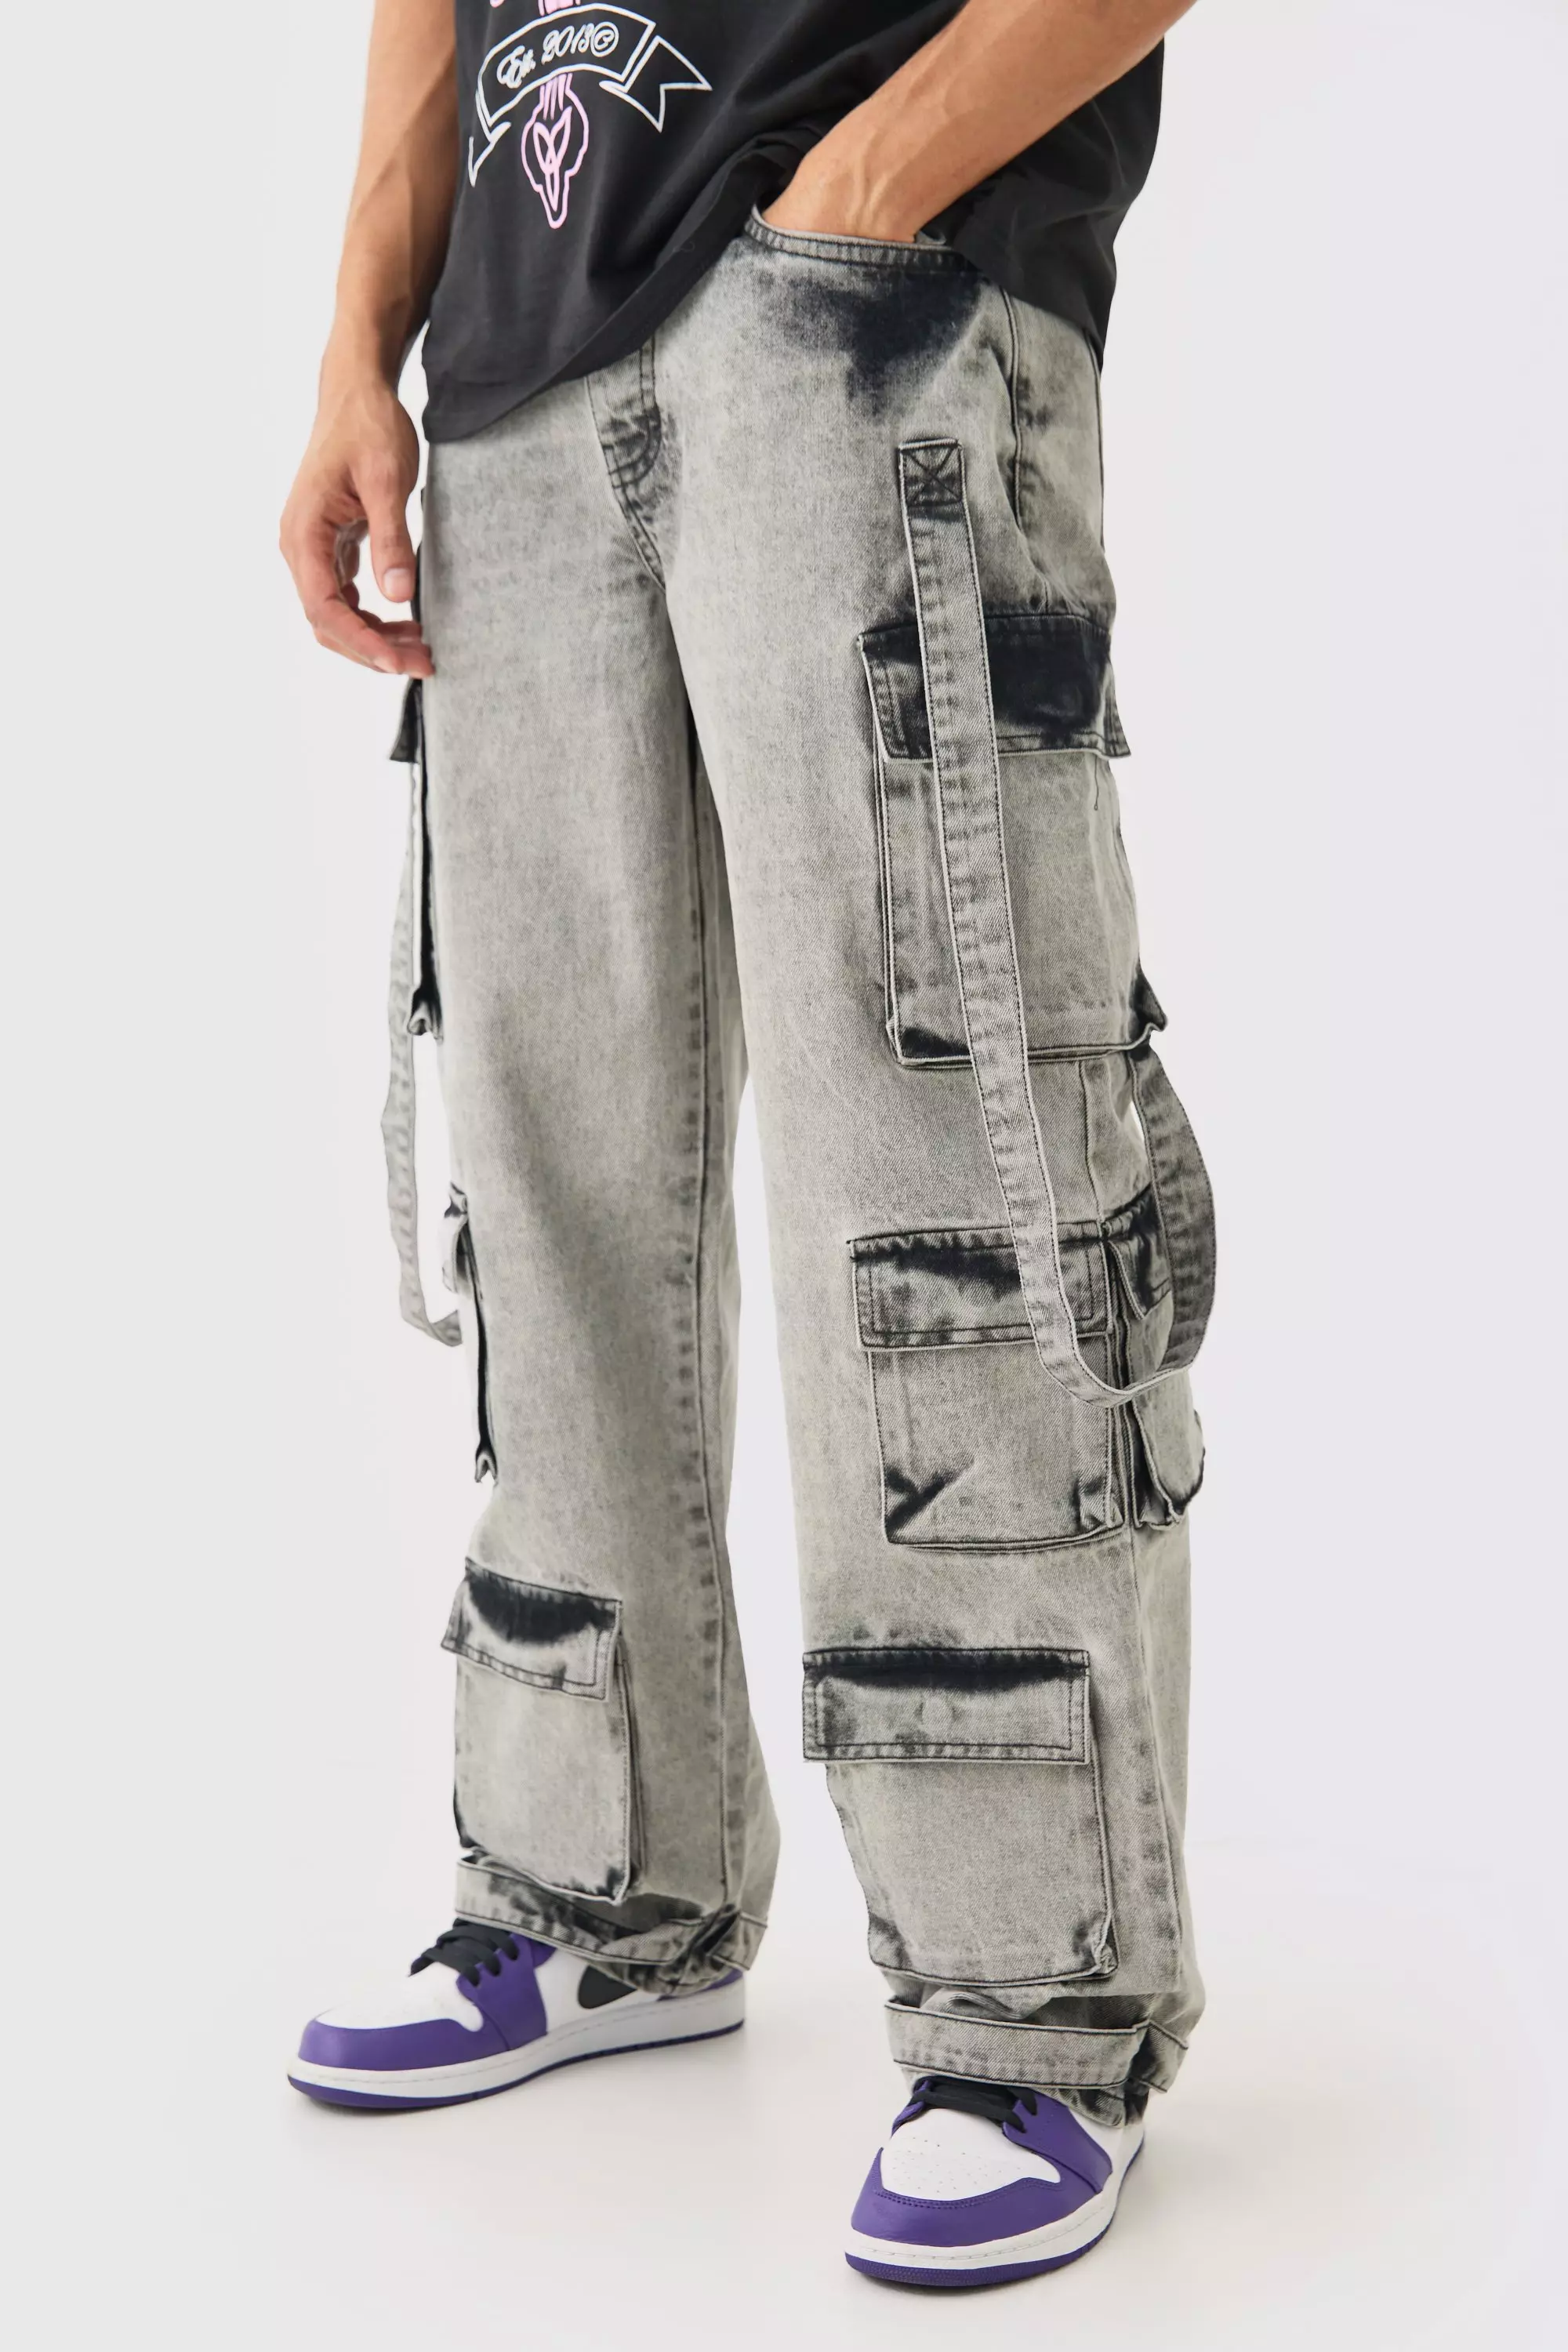 Baggy Rigid Multi Pocket Flare Acid Washed Jeans In Charcoal Charcoal